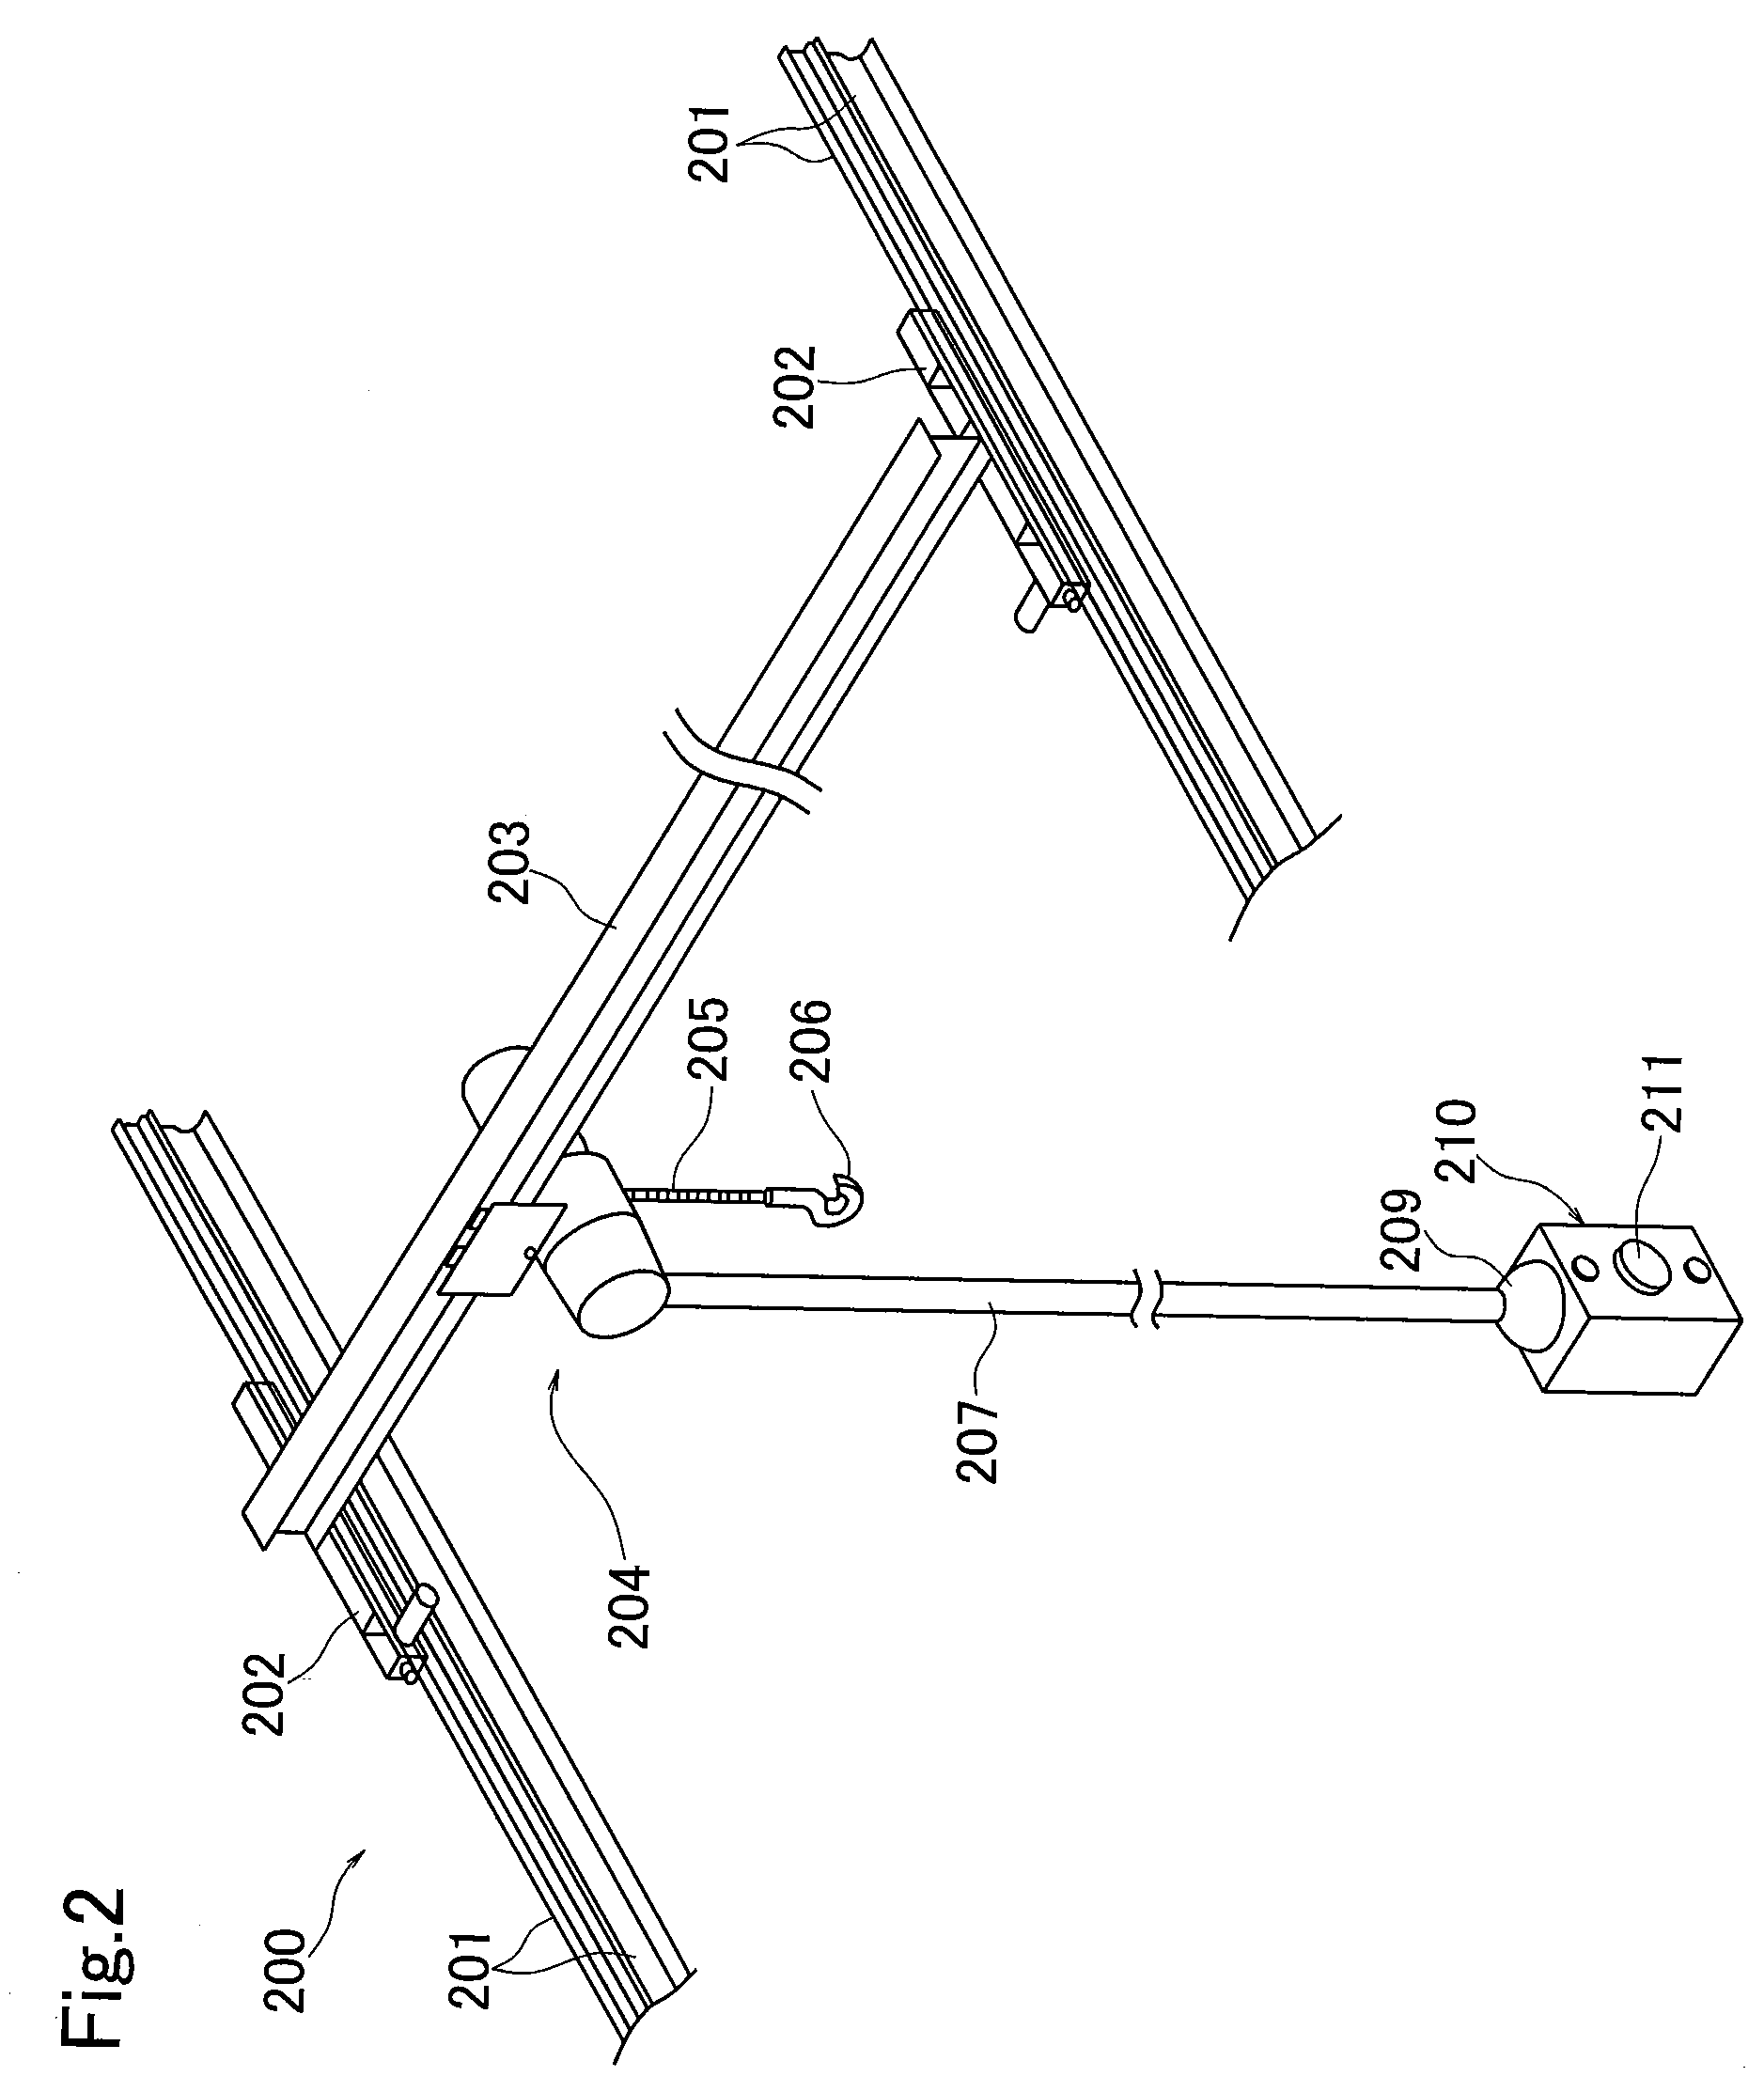 Traveling crane operation control apparatus and method